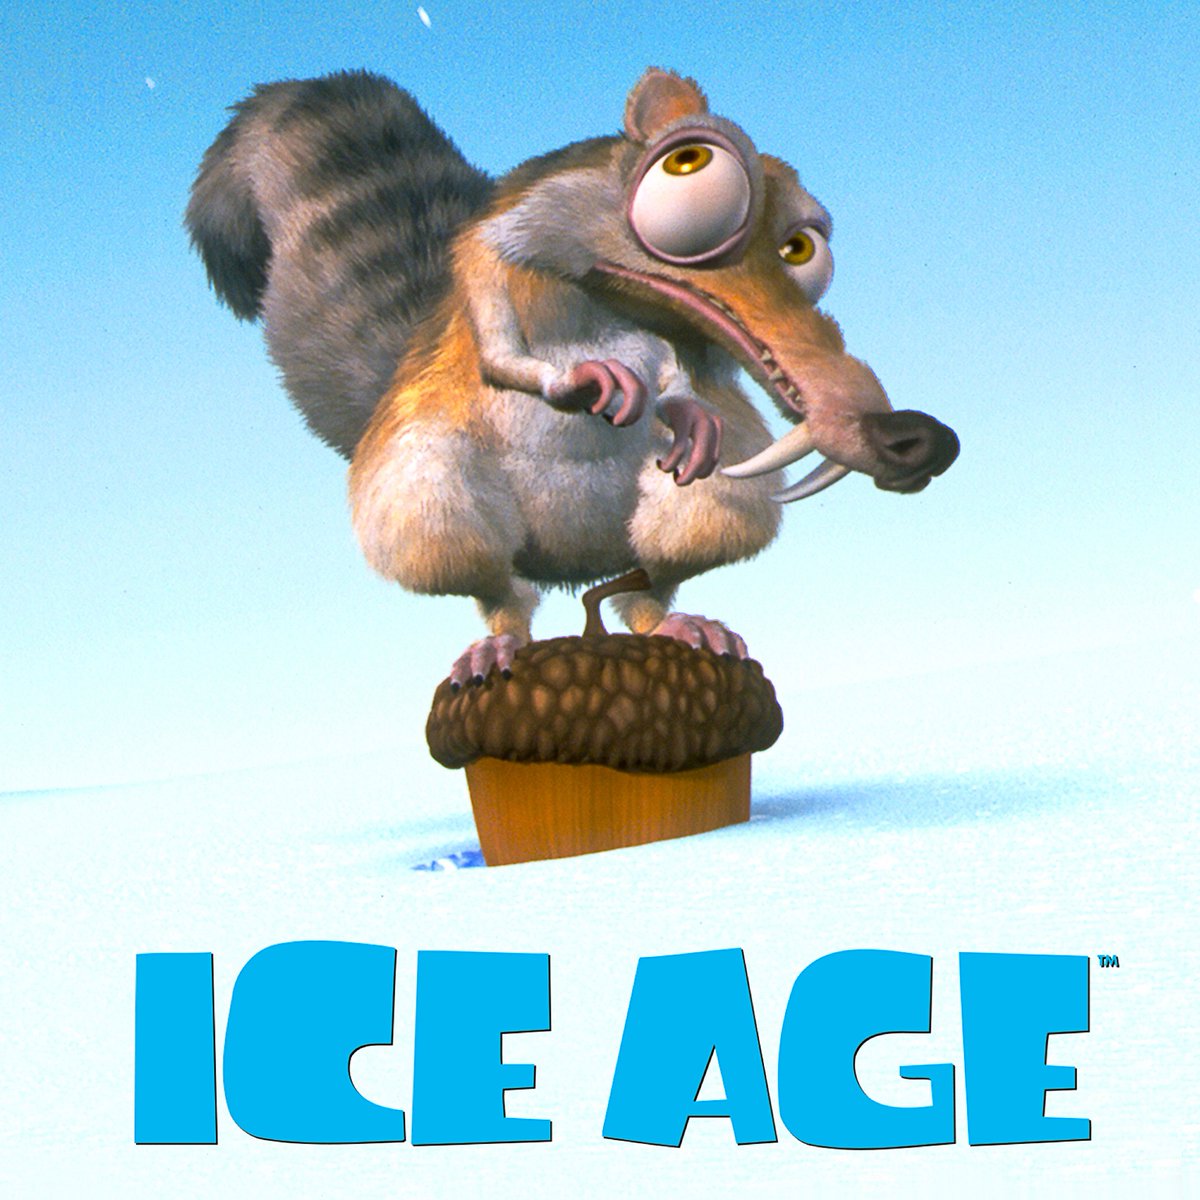 Don’t get left out in the cold! Tomorrow is the last day to experience the original Ice Age again on the big screen. Ice Age is now playing in select participating theaters in the US. Find out more: di.sn/6009MWrt3